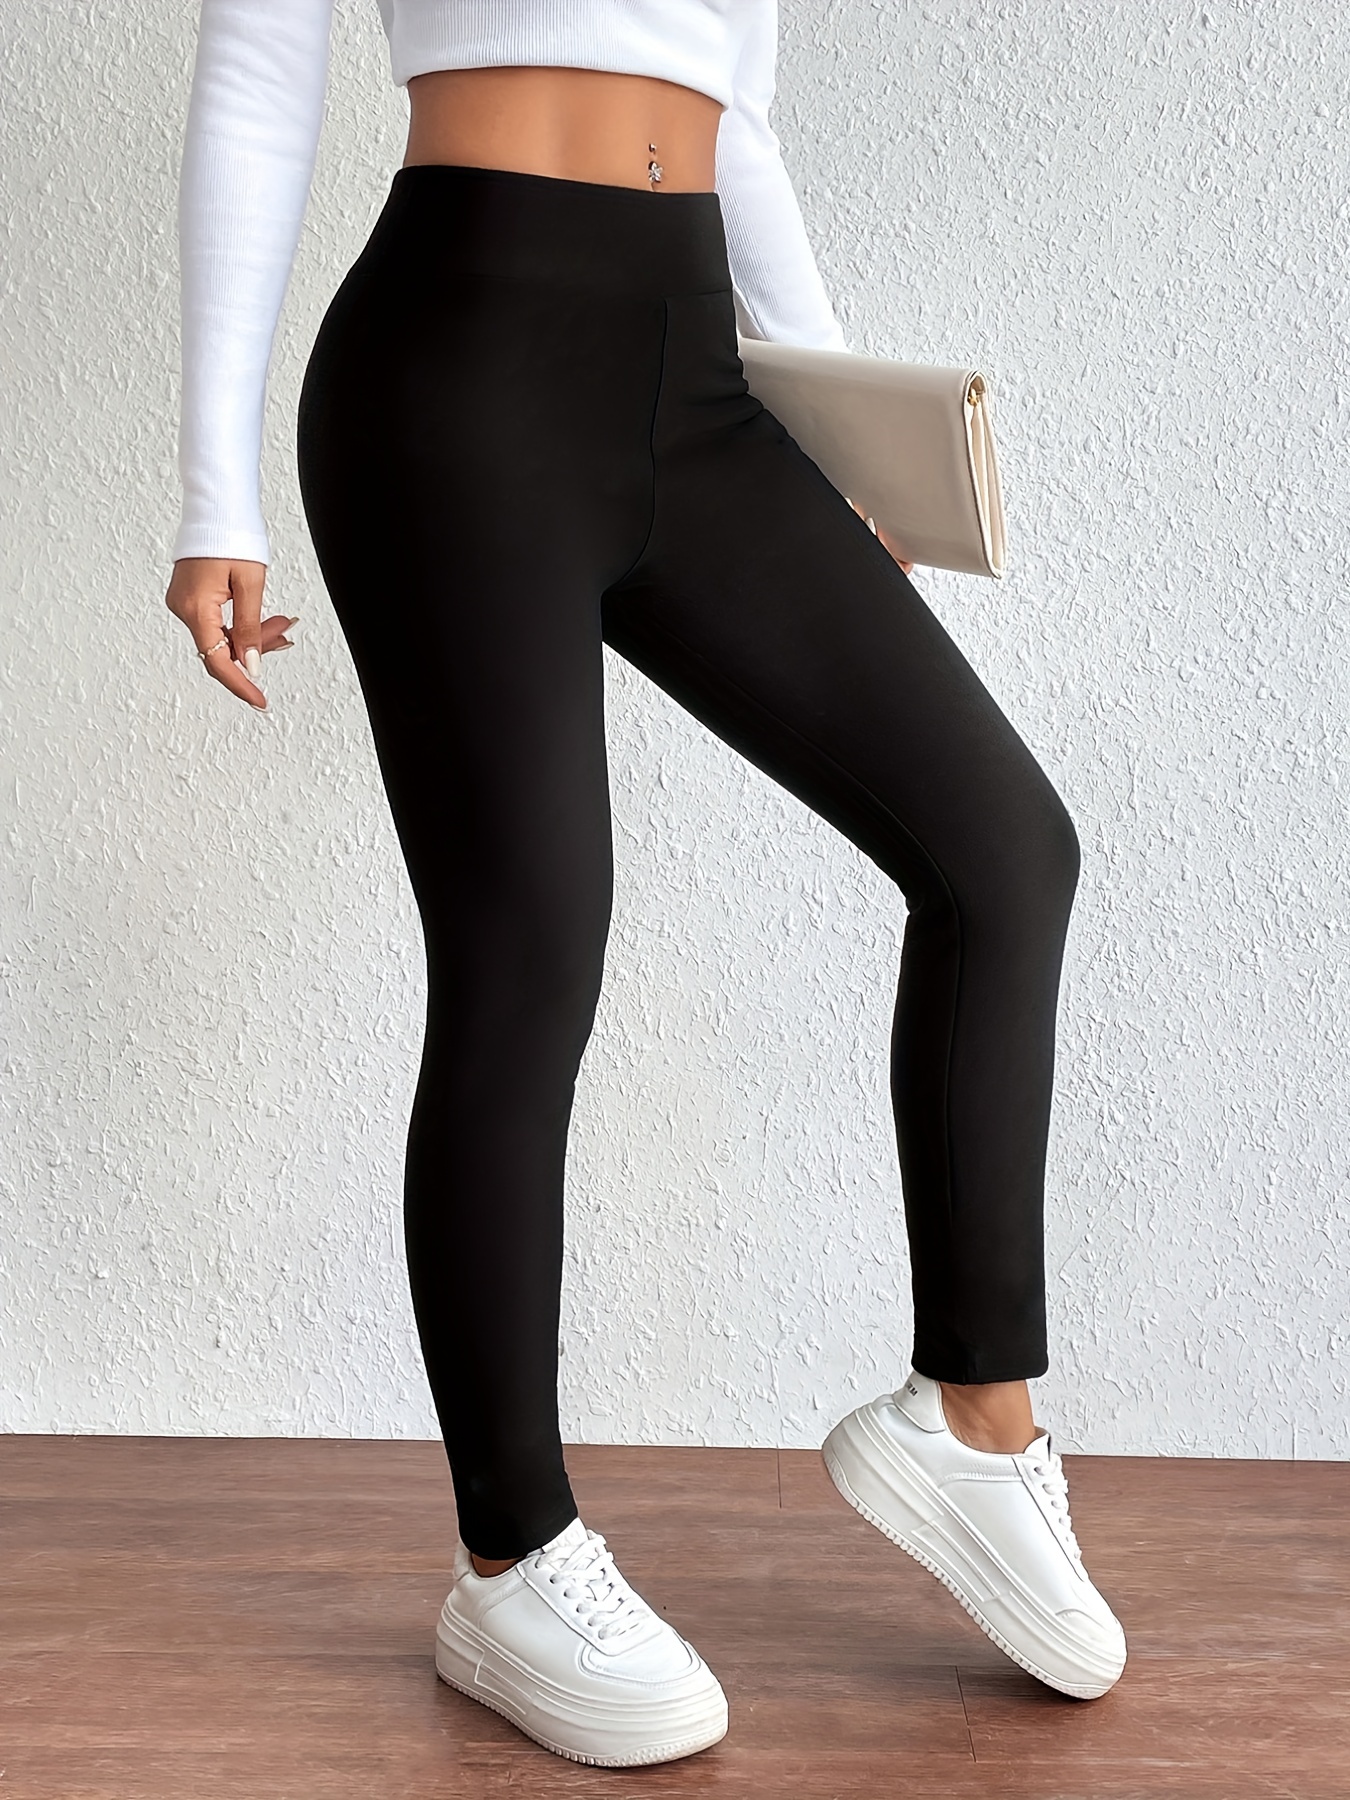 SHEIN Young Girl Solid Thermal Leggings